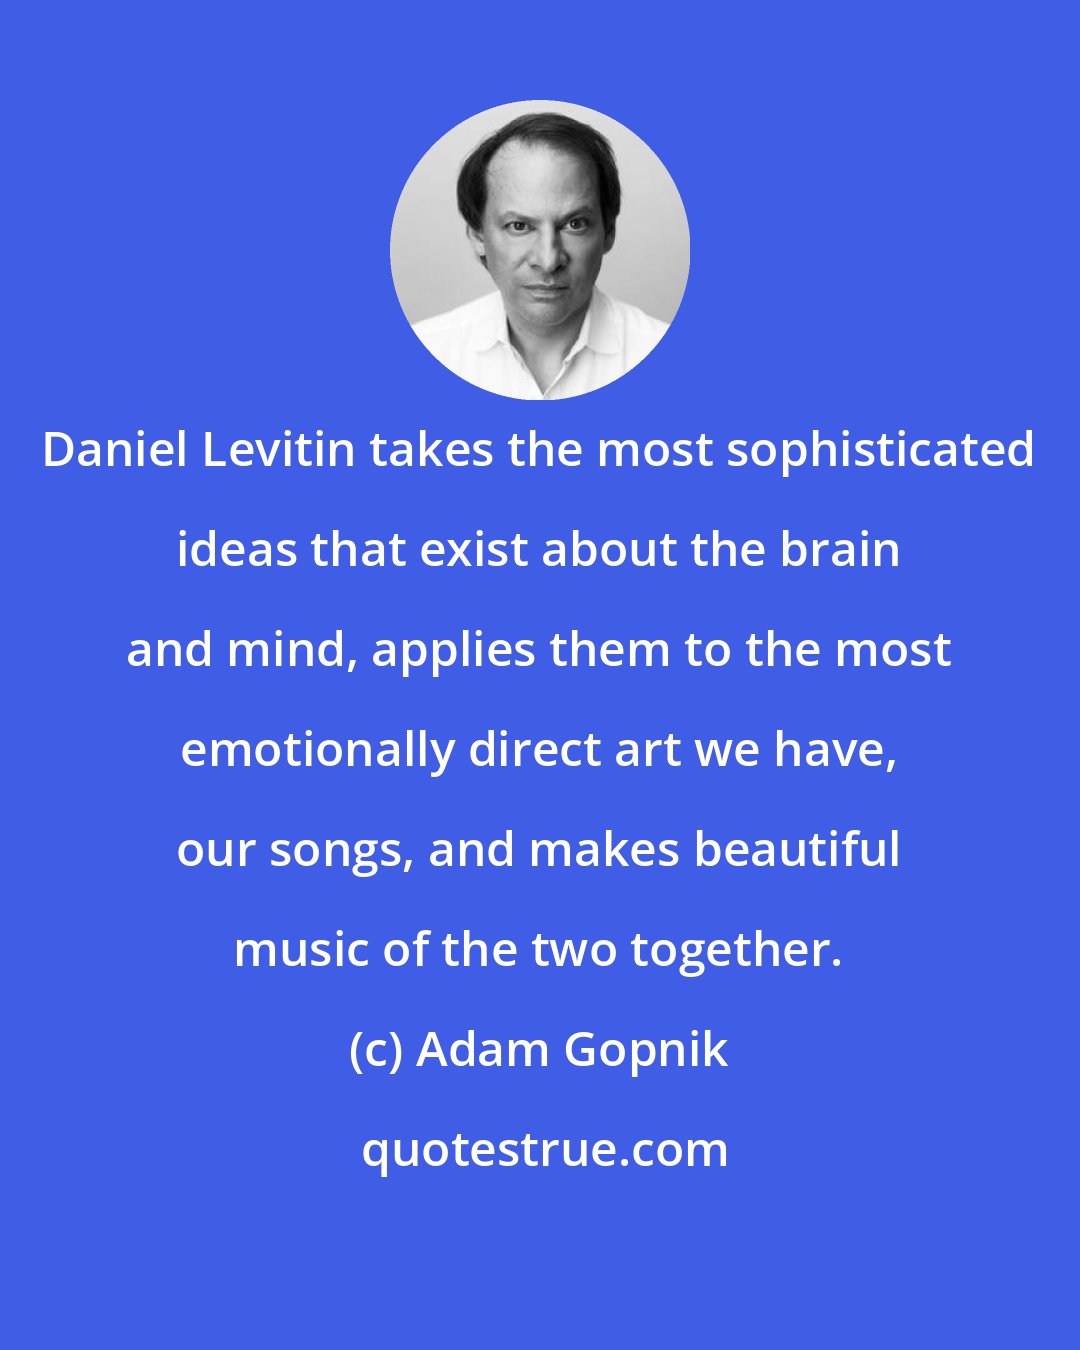 Adam Gopnik: Daniel Levitin takes the most sophisticated ideas that exist about the brain and mind, applies them to the most emotionally direct art we have, our songs, and makes beautiful music of the two together.